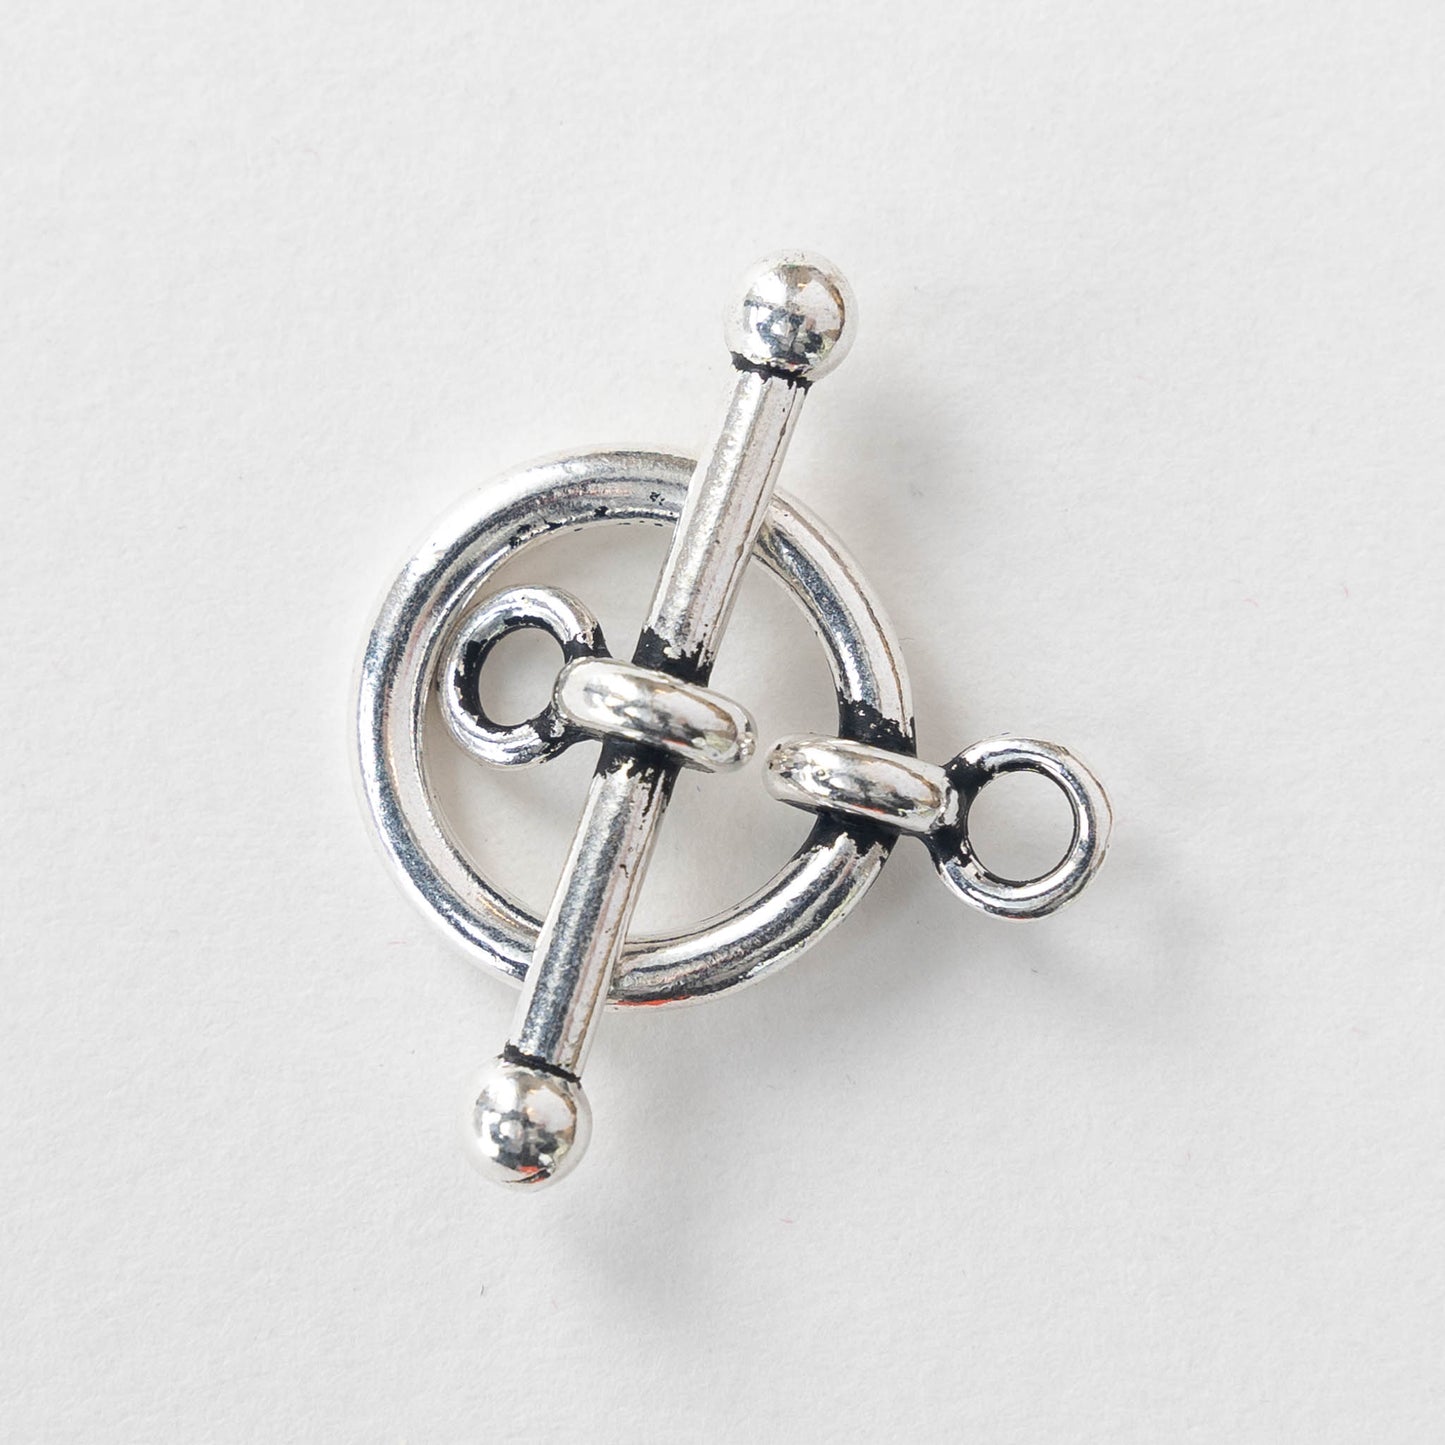 Load image into Gallery viewer, Large 18.5mm Toggle Clasp - Antiqued Silver Finish - 1 Clasp
